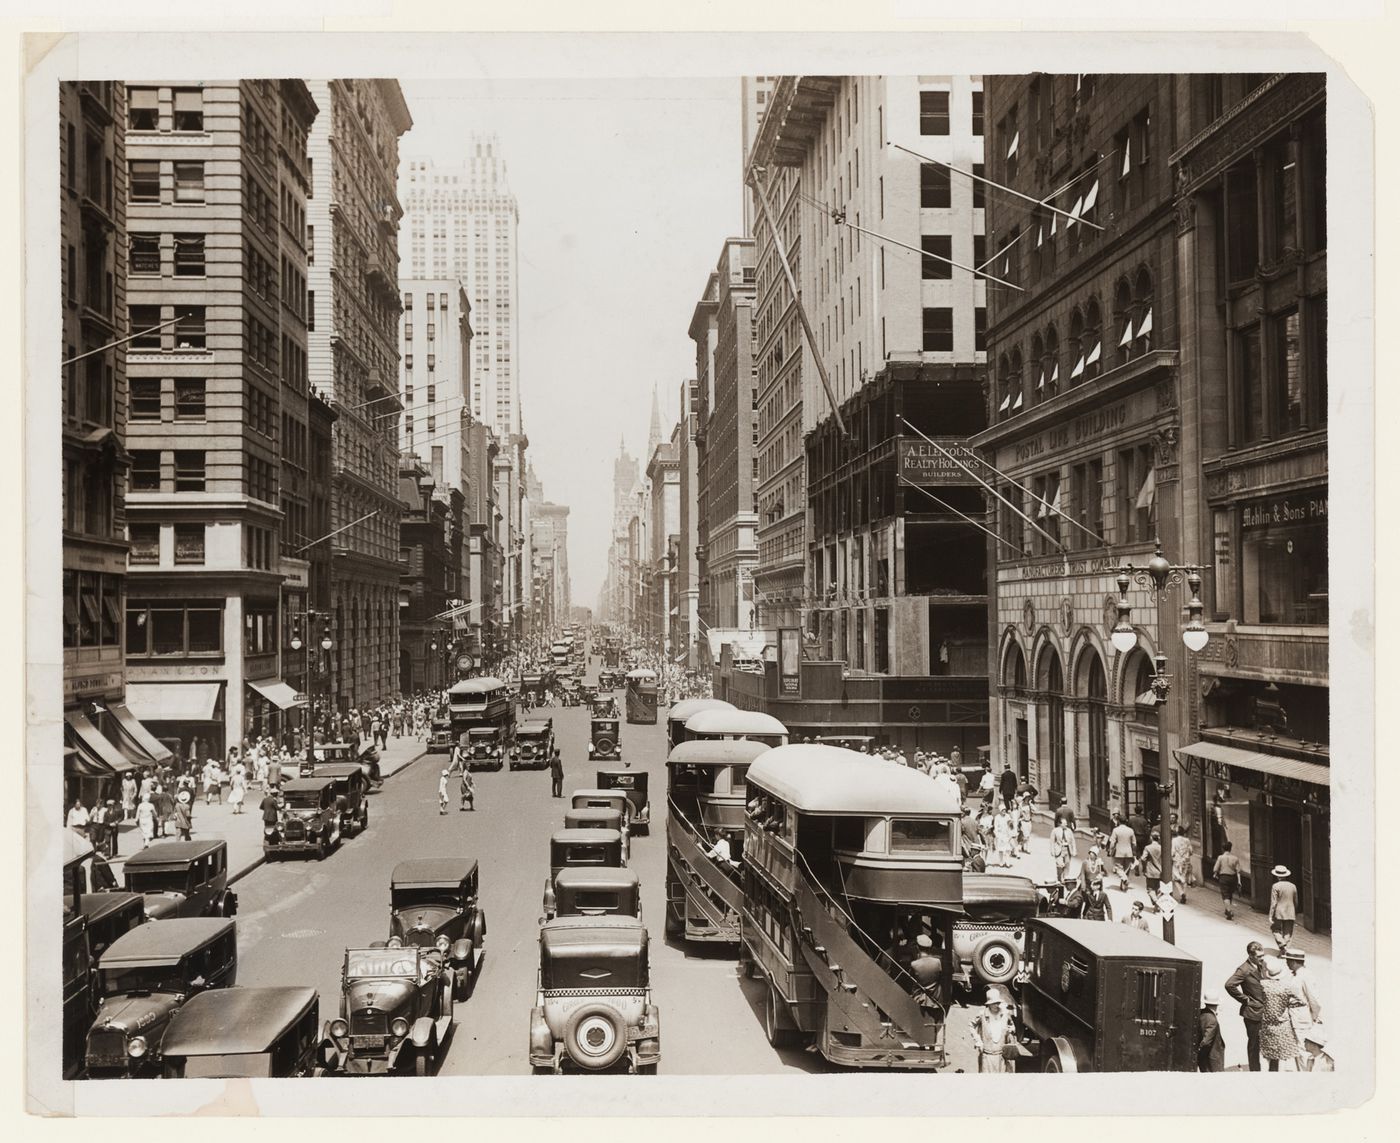 Fifth Avenue at 43rd Street with buses in foreground looking up?, New York City, New York